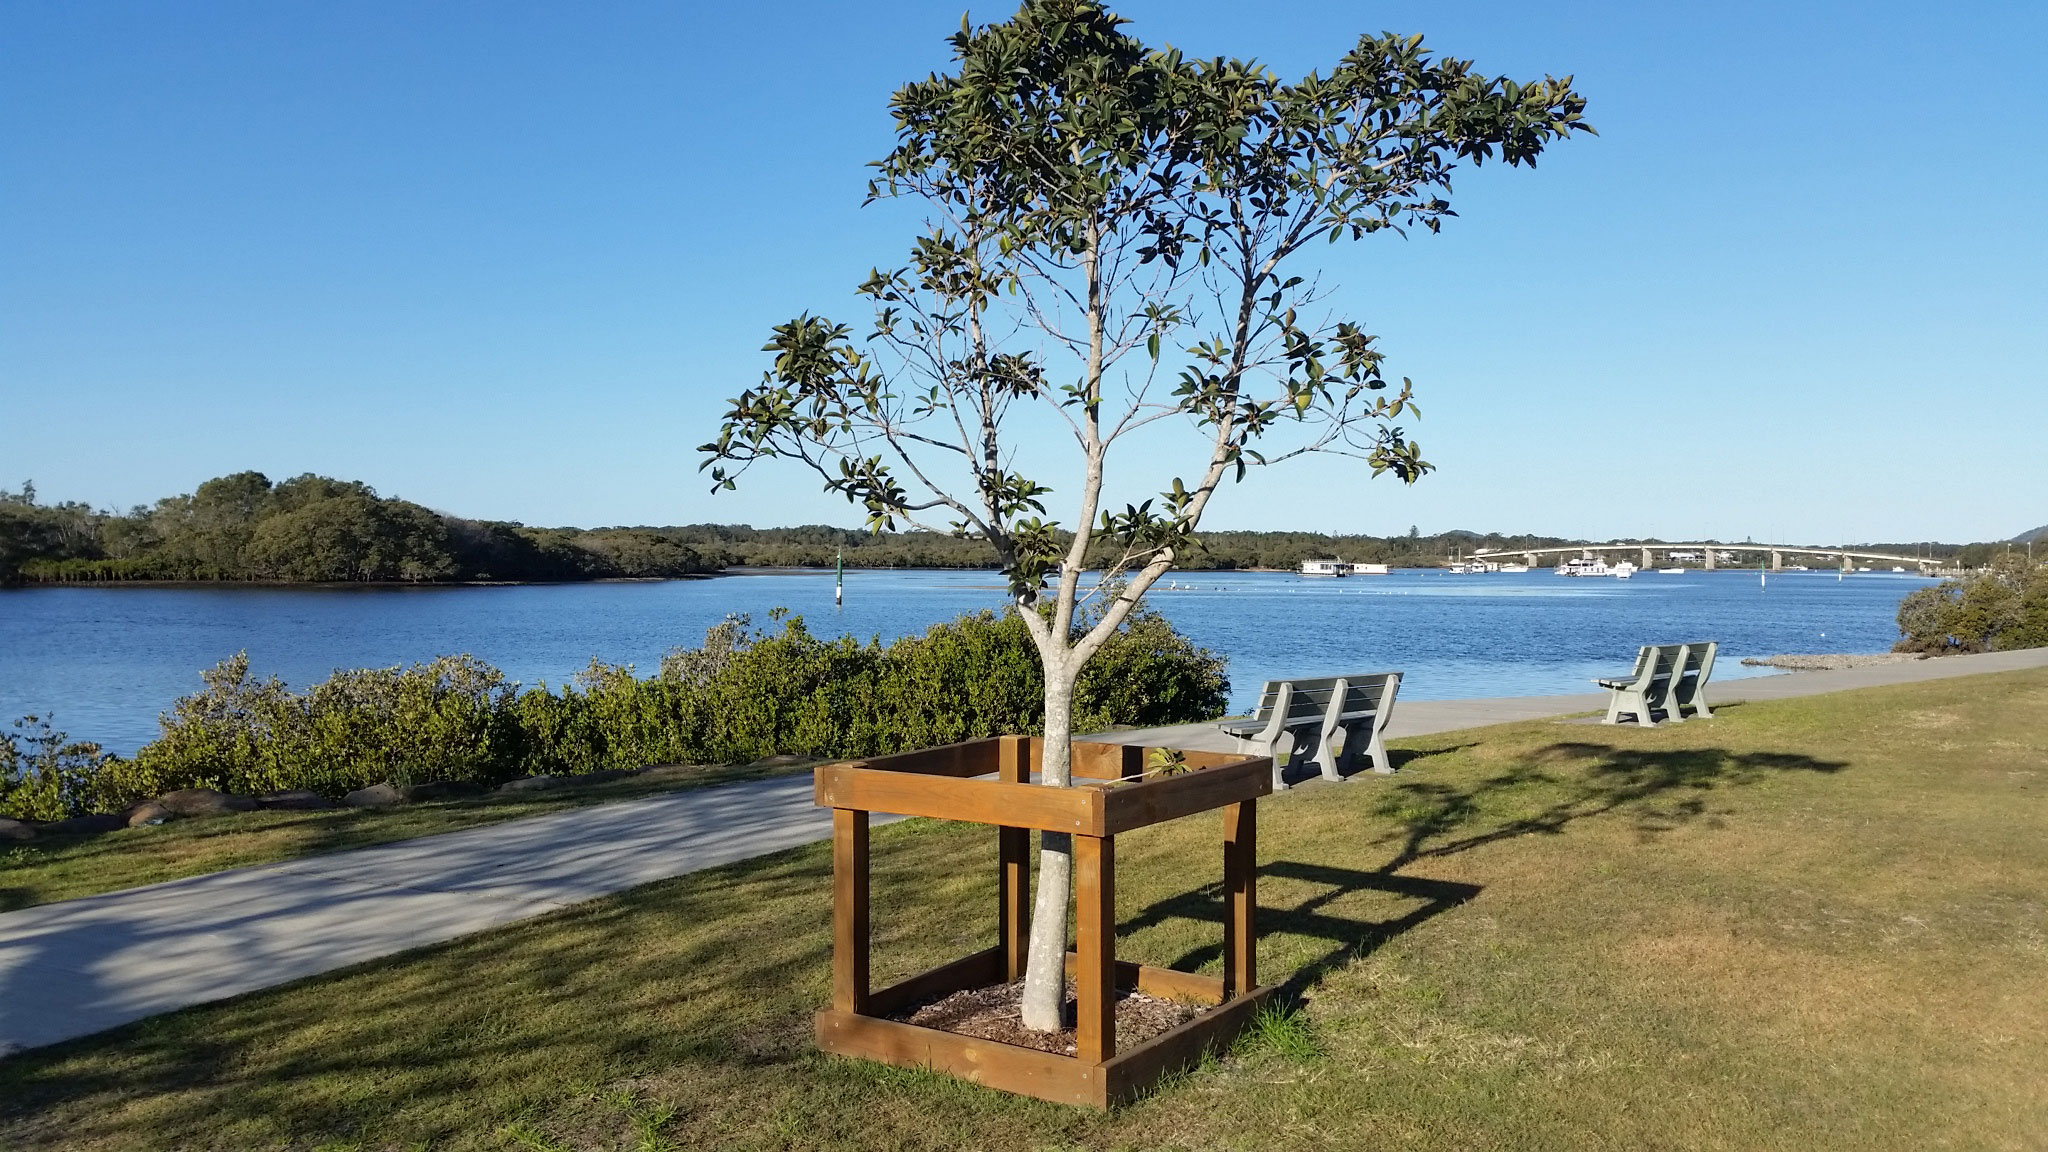 Photo showing one of the tree guards built by the shed along the Myall River